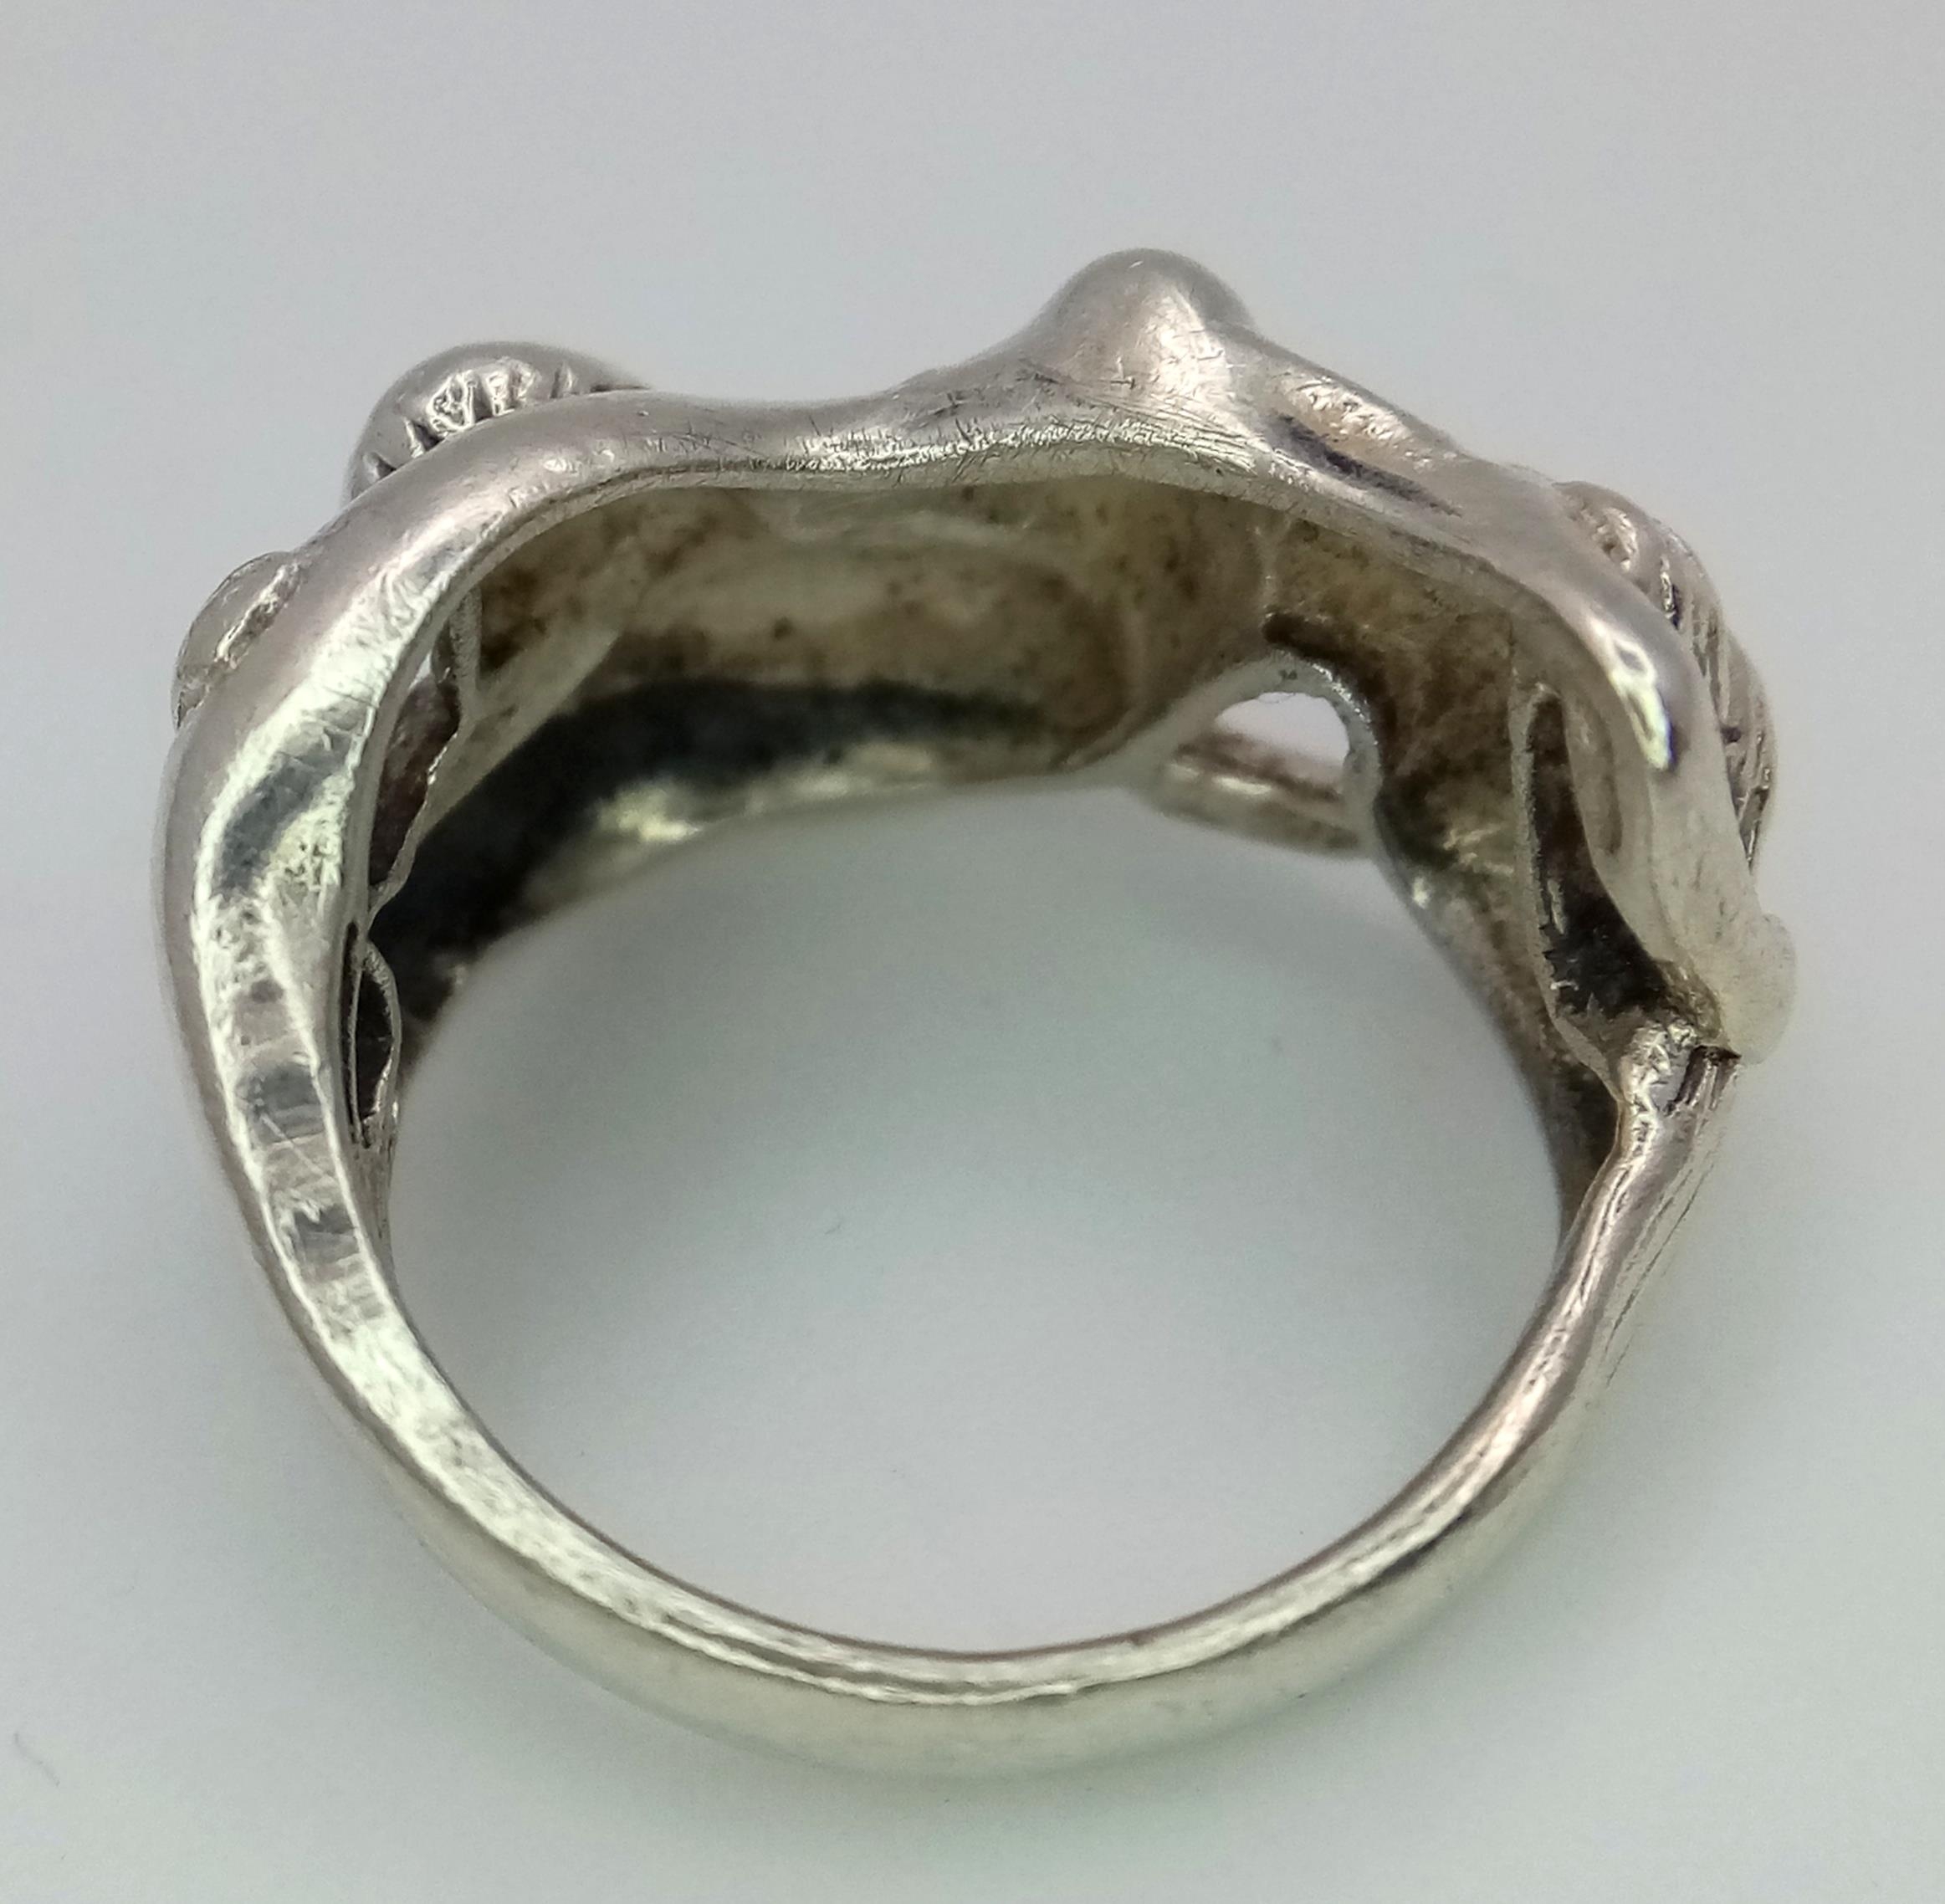 A Vintage and Rare Sterling Silver Erotic Design Ring Size N-N1/2. Measures 1.4cm Wide at the - Image 4 of 5